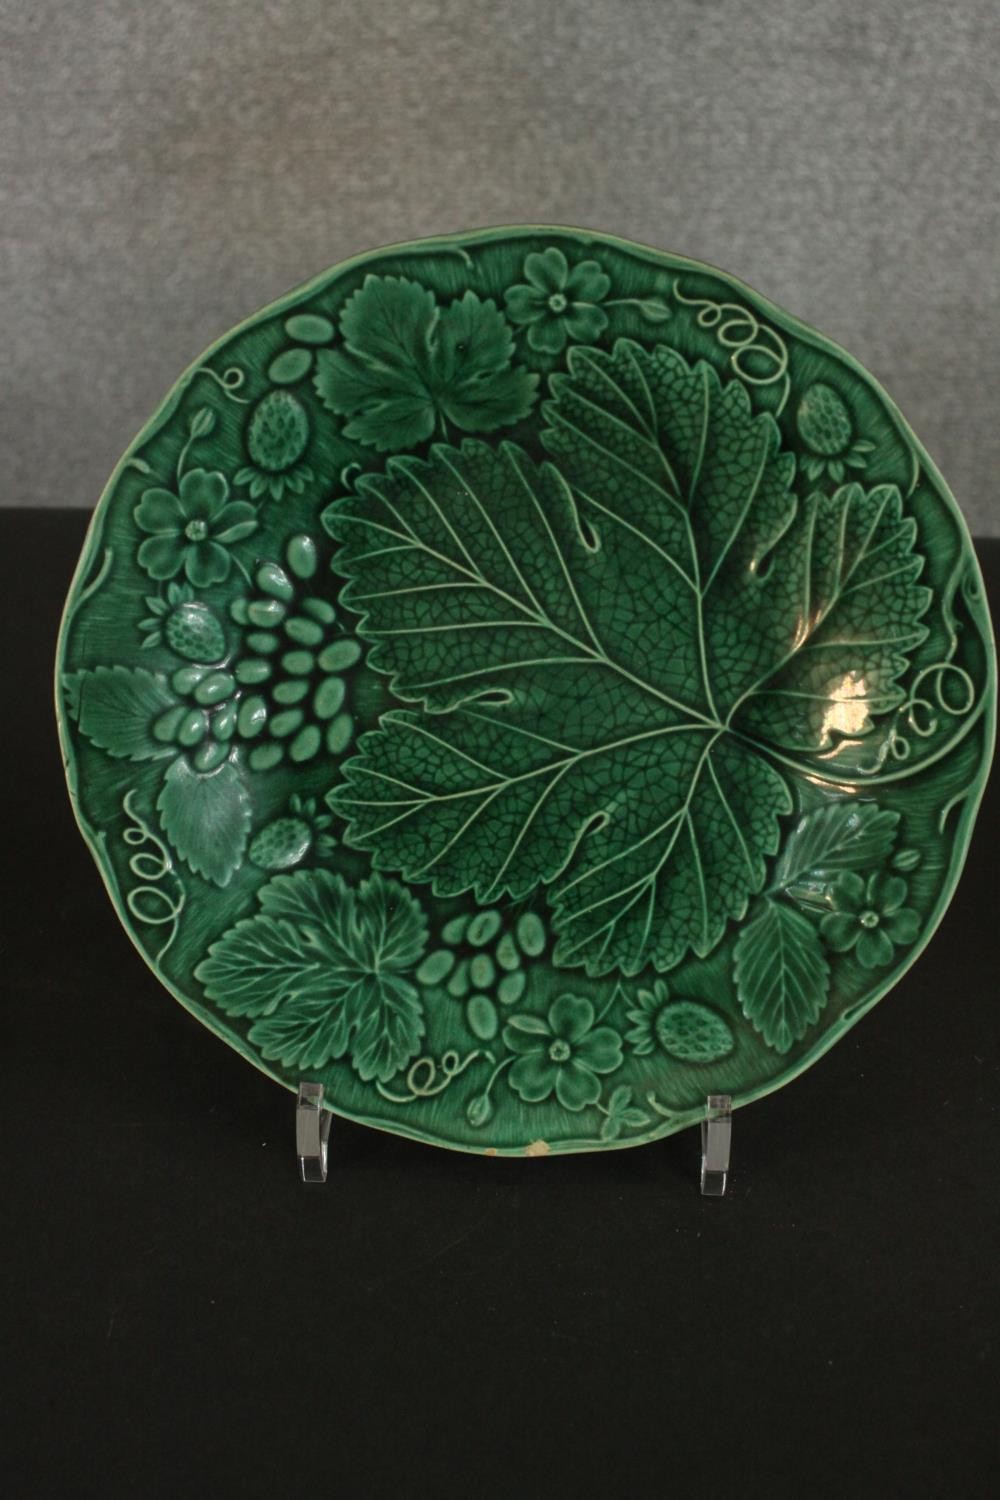 A collection of Royal Doulton Merryweather plates and bowls, along with a 19th century green glaze - Image 7 of 14